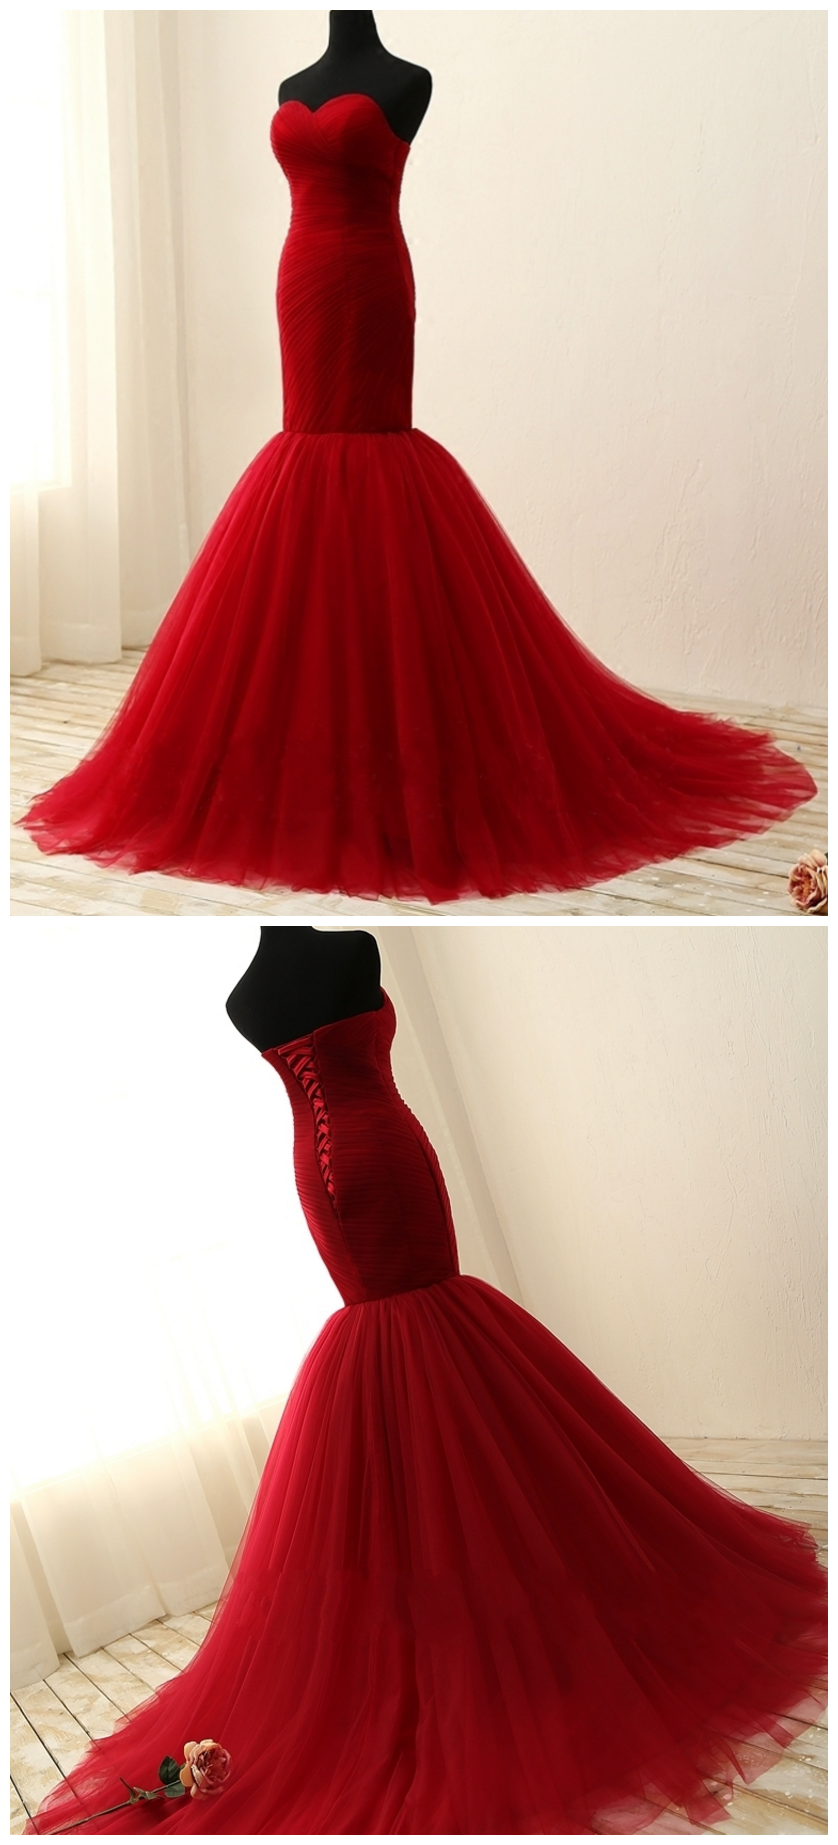 Mermaid Evening Dresses ,party Red Sweetheart Beautiful Women Prom Formal Evening Gowns Dresses